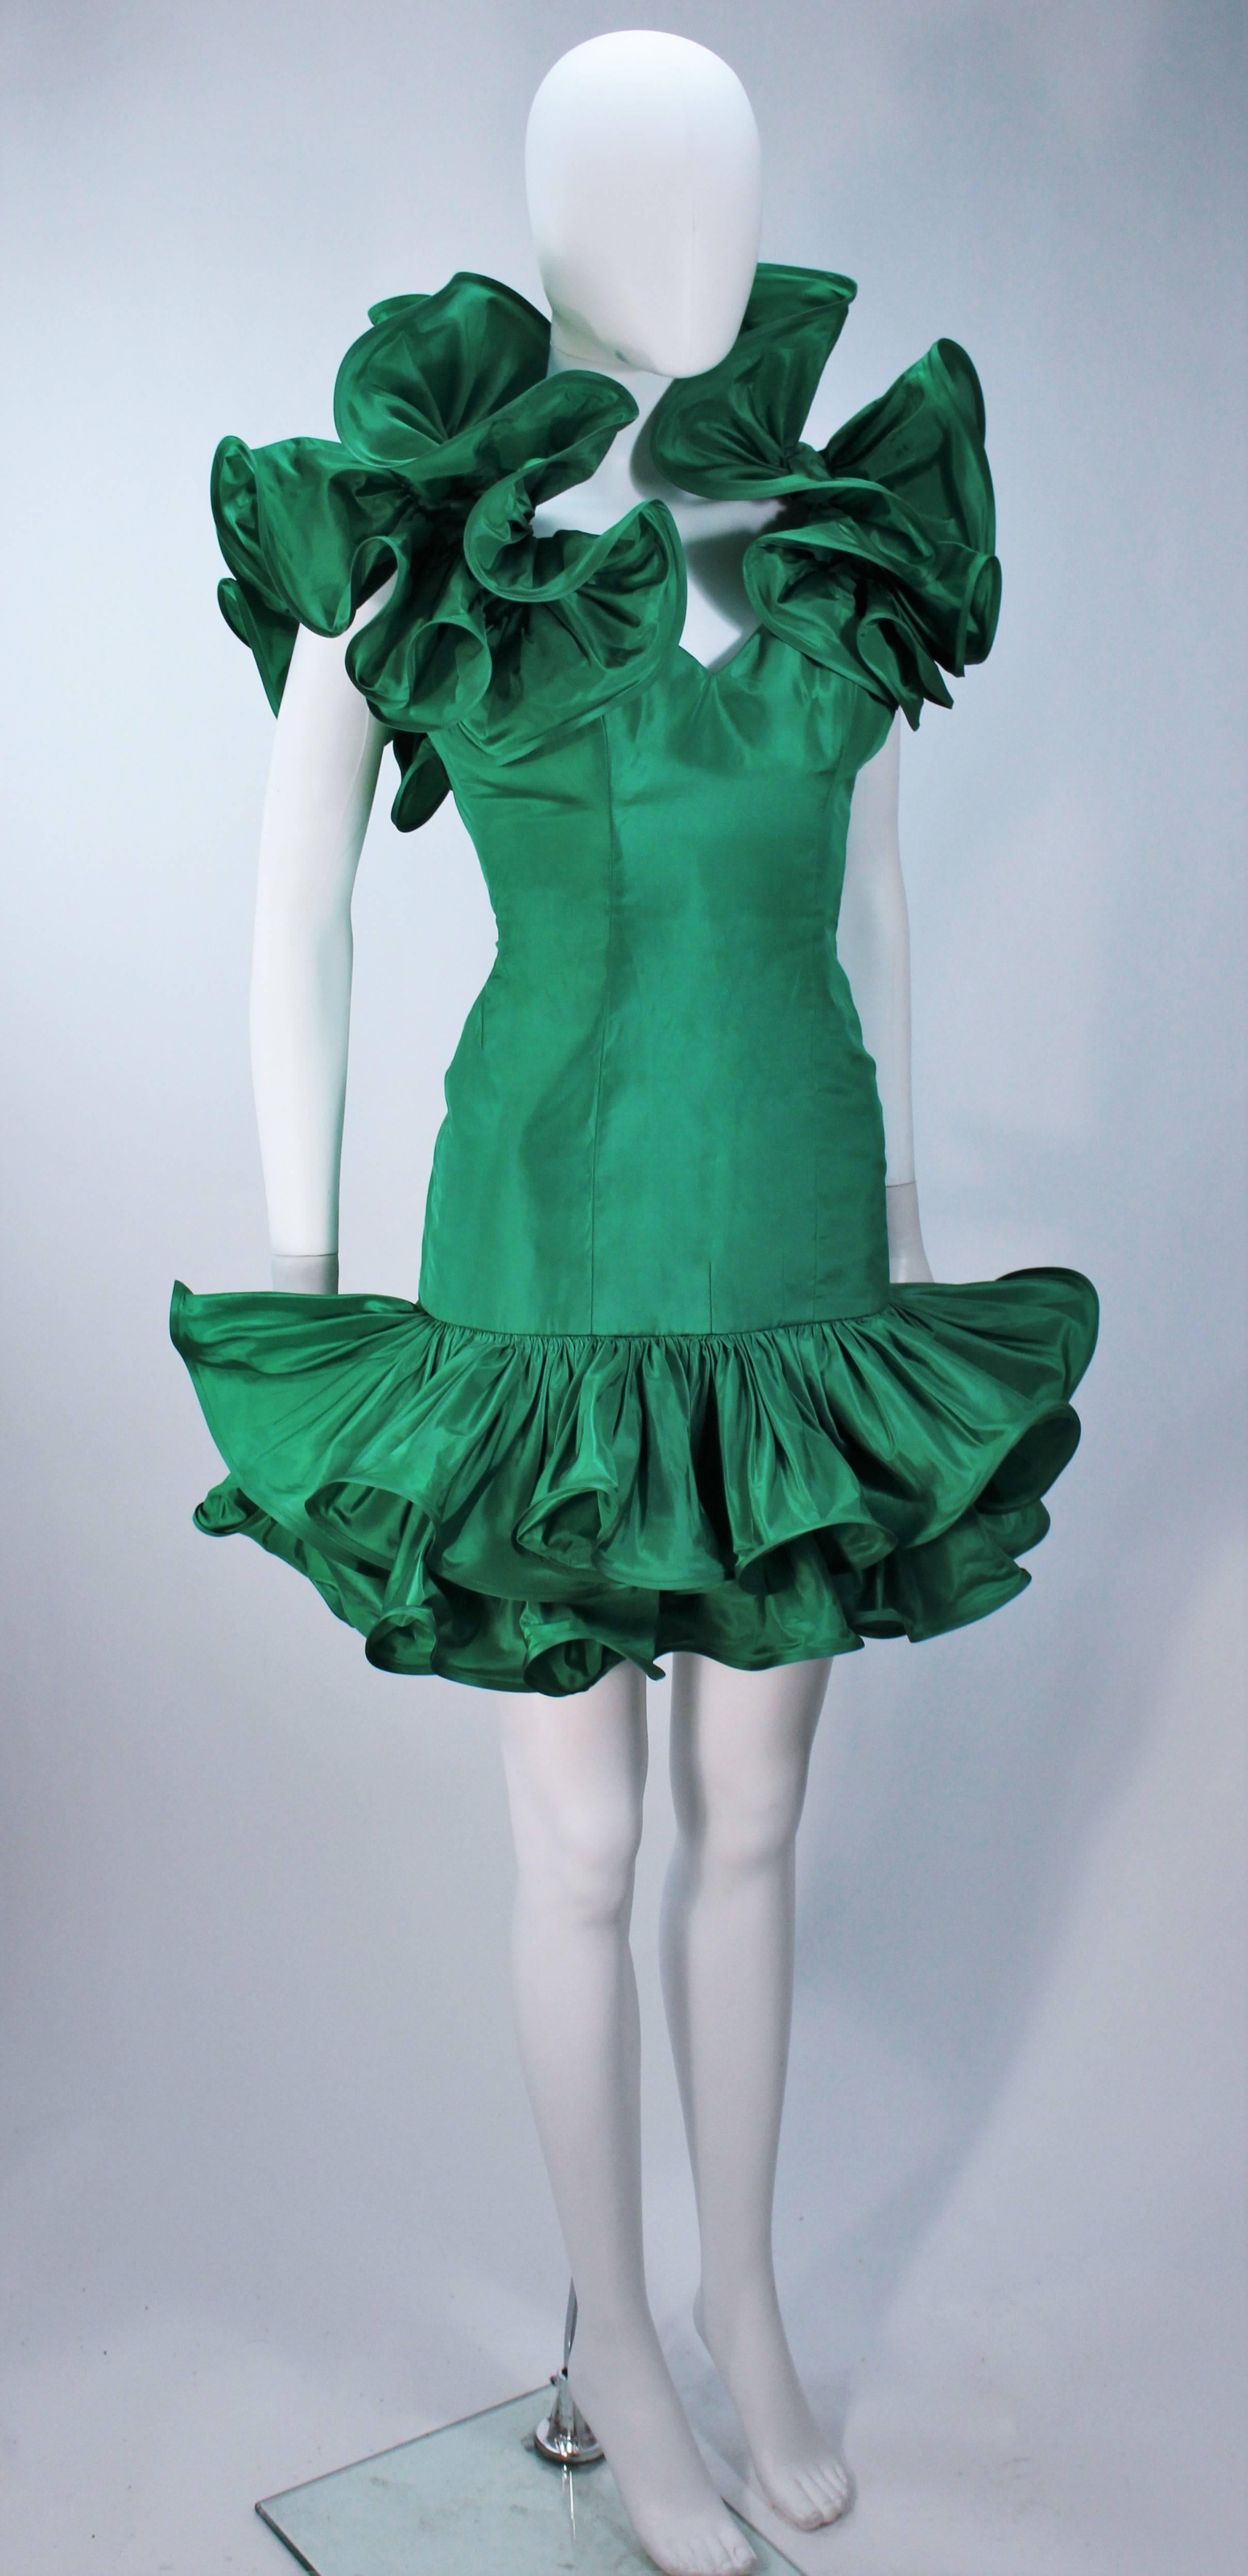 Women's TRAVILLA Attributed Kelly Green Ruffled Cocktail Dress Size 6